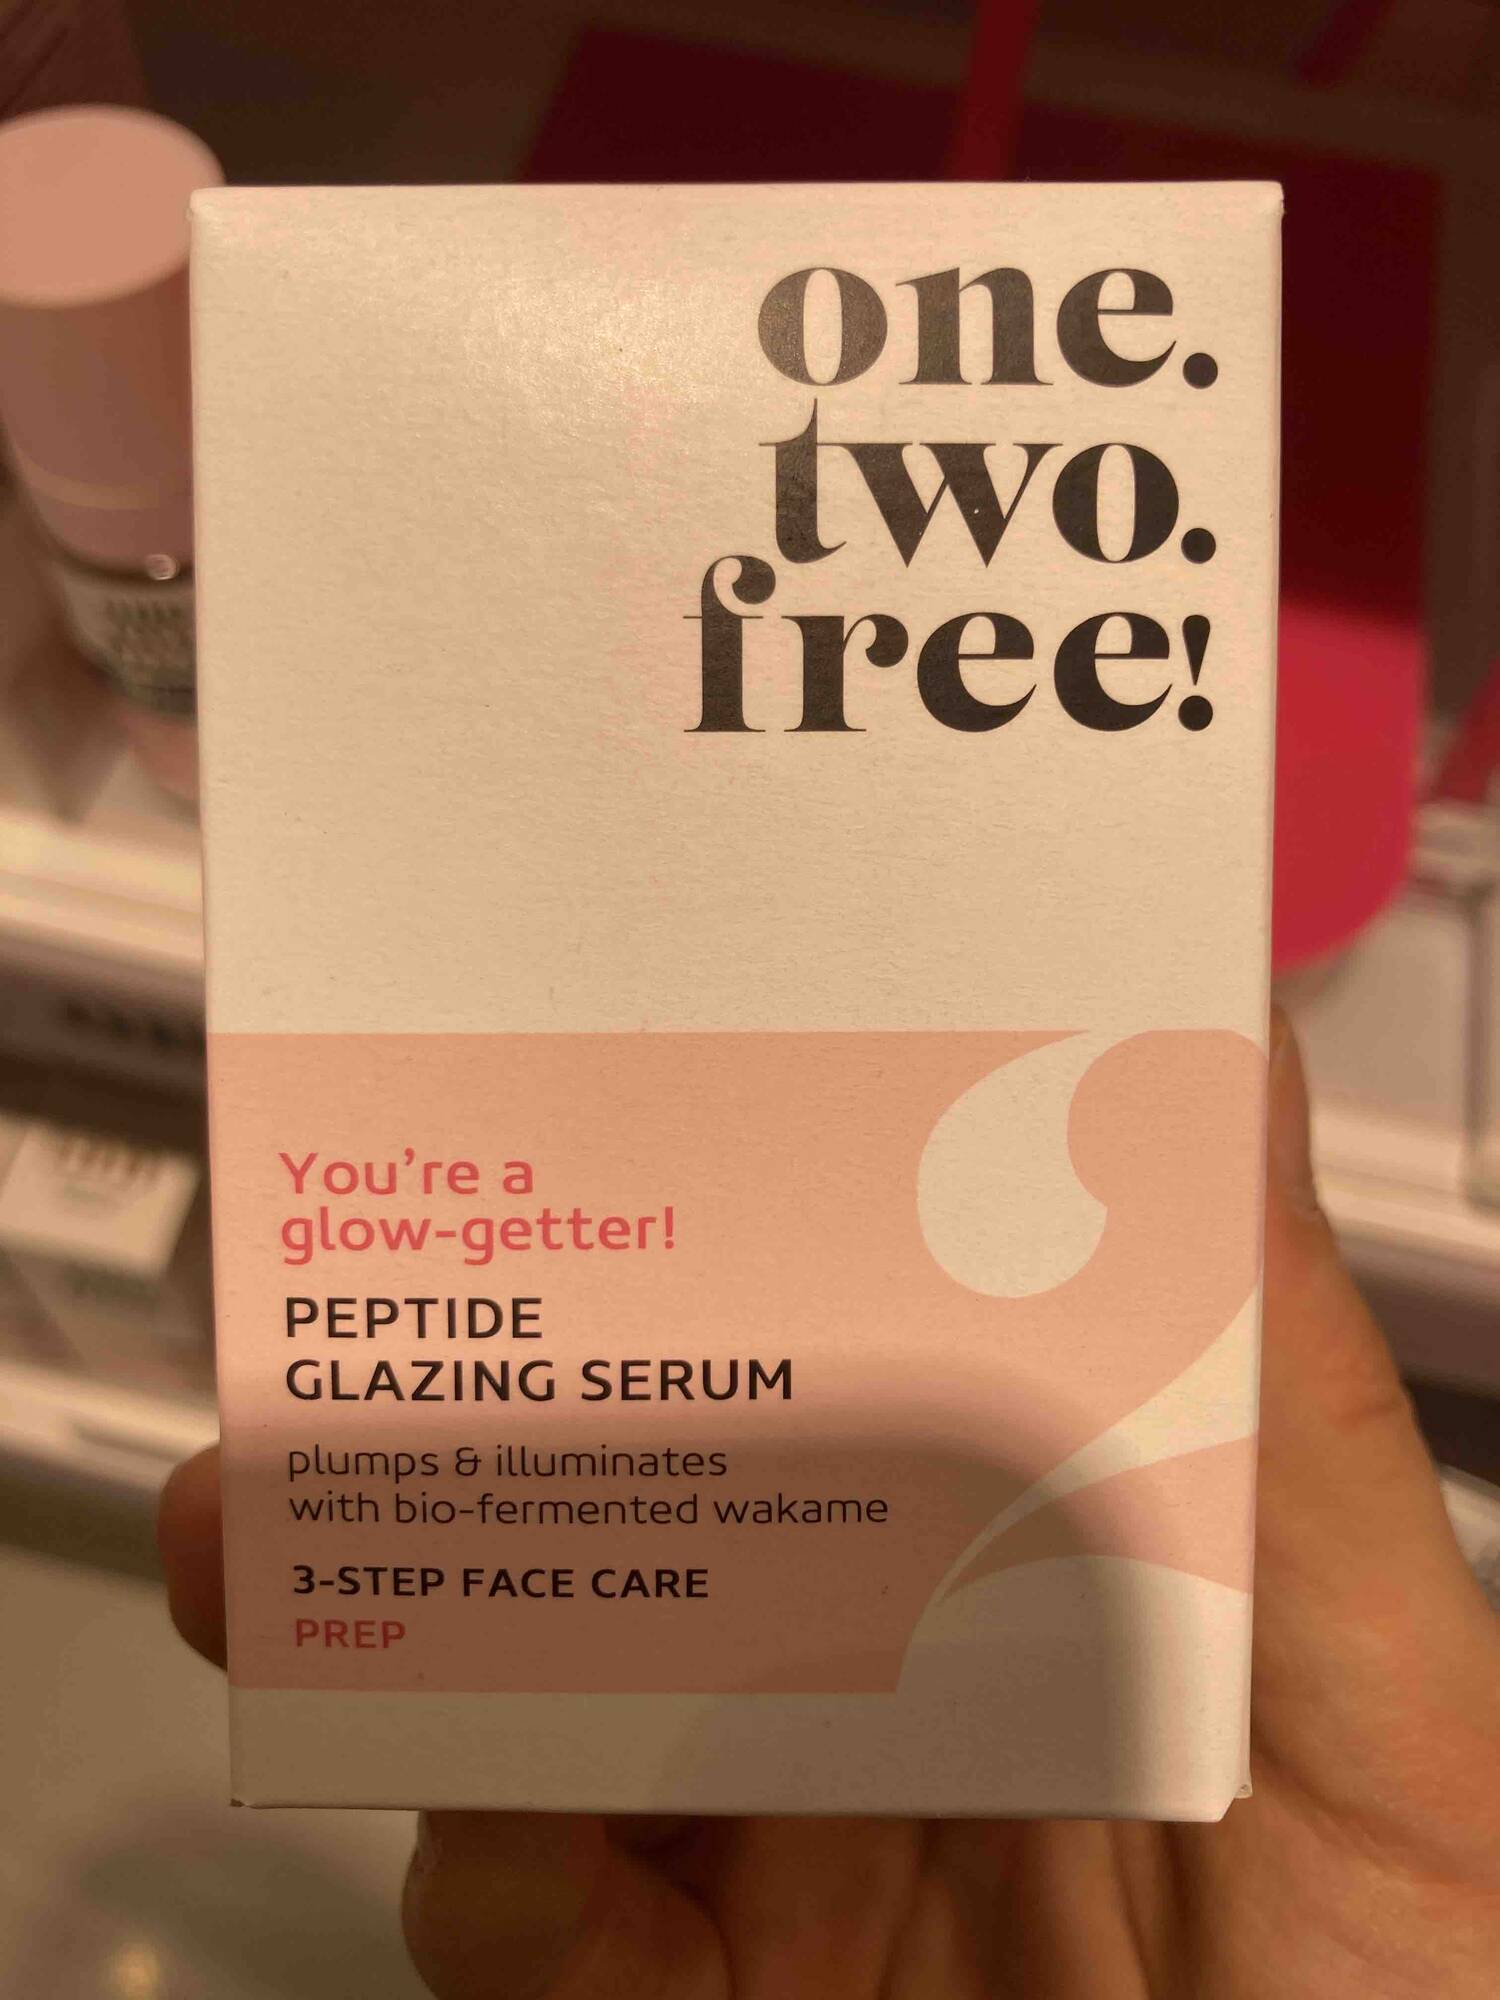 ONE.TWO.FREE! - You're glow-getter! Peptide glazing serum